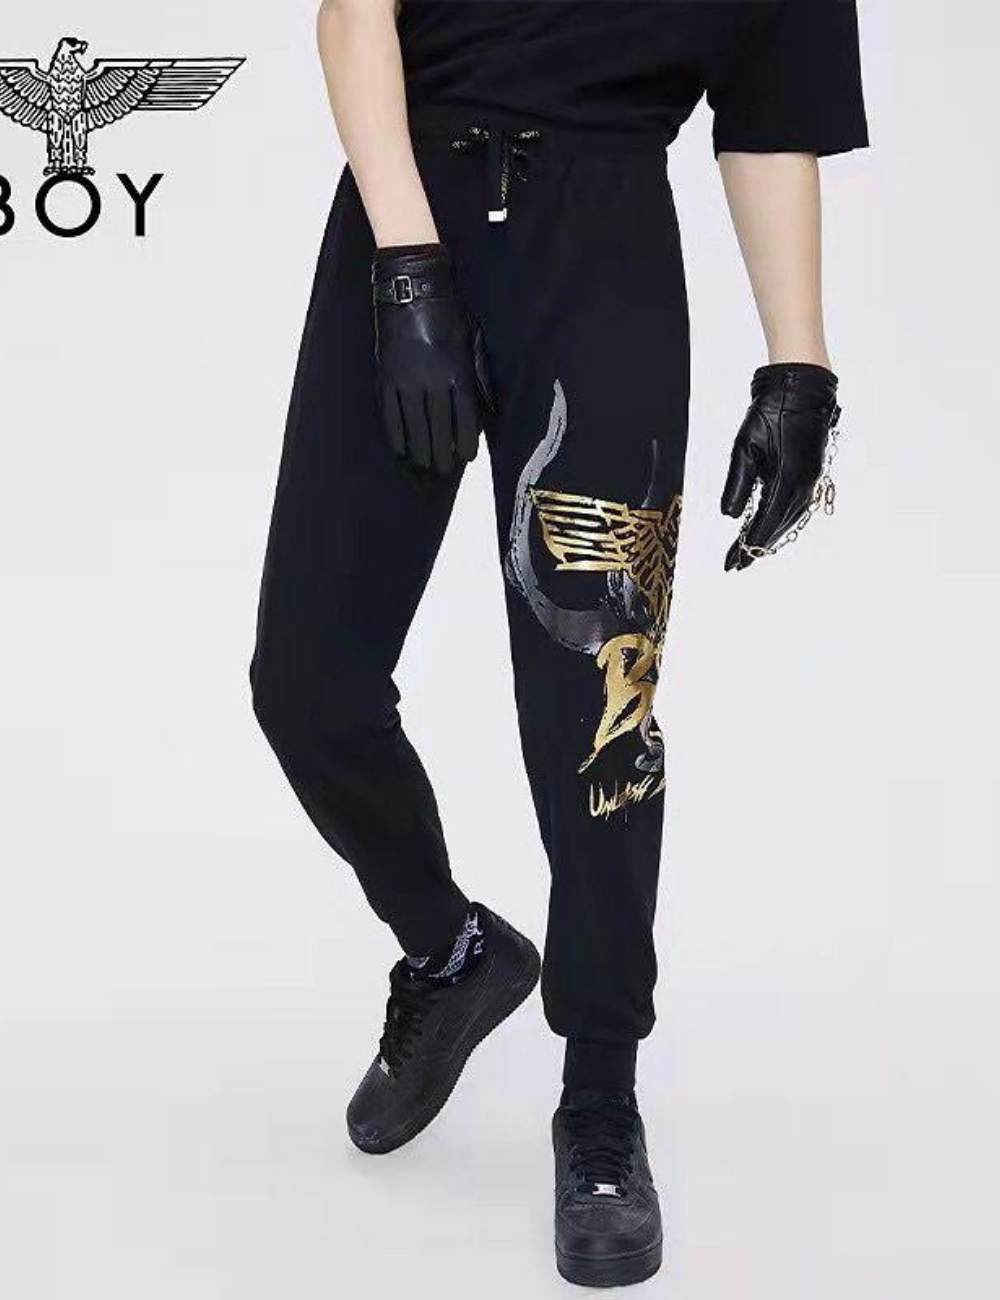 Boy London Unleash The Power Gold Eagle SweatPants - Shop Streetwear, Sneakers, Slippers and Gifts online | Malaysia - The Factory KL